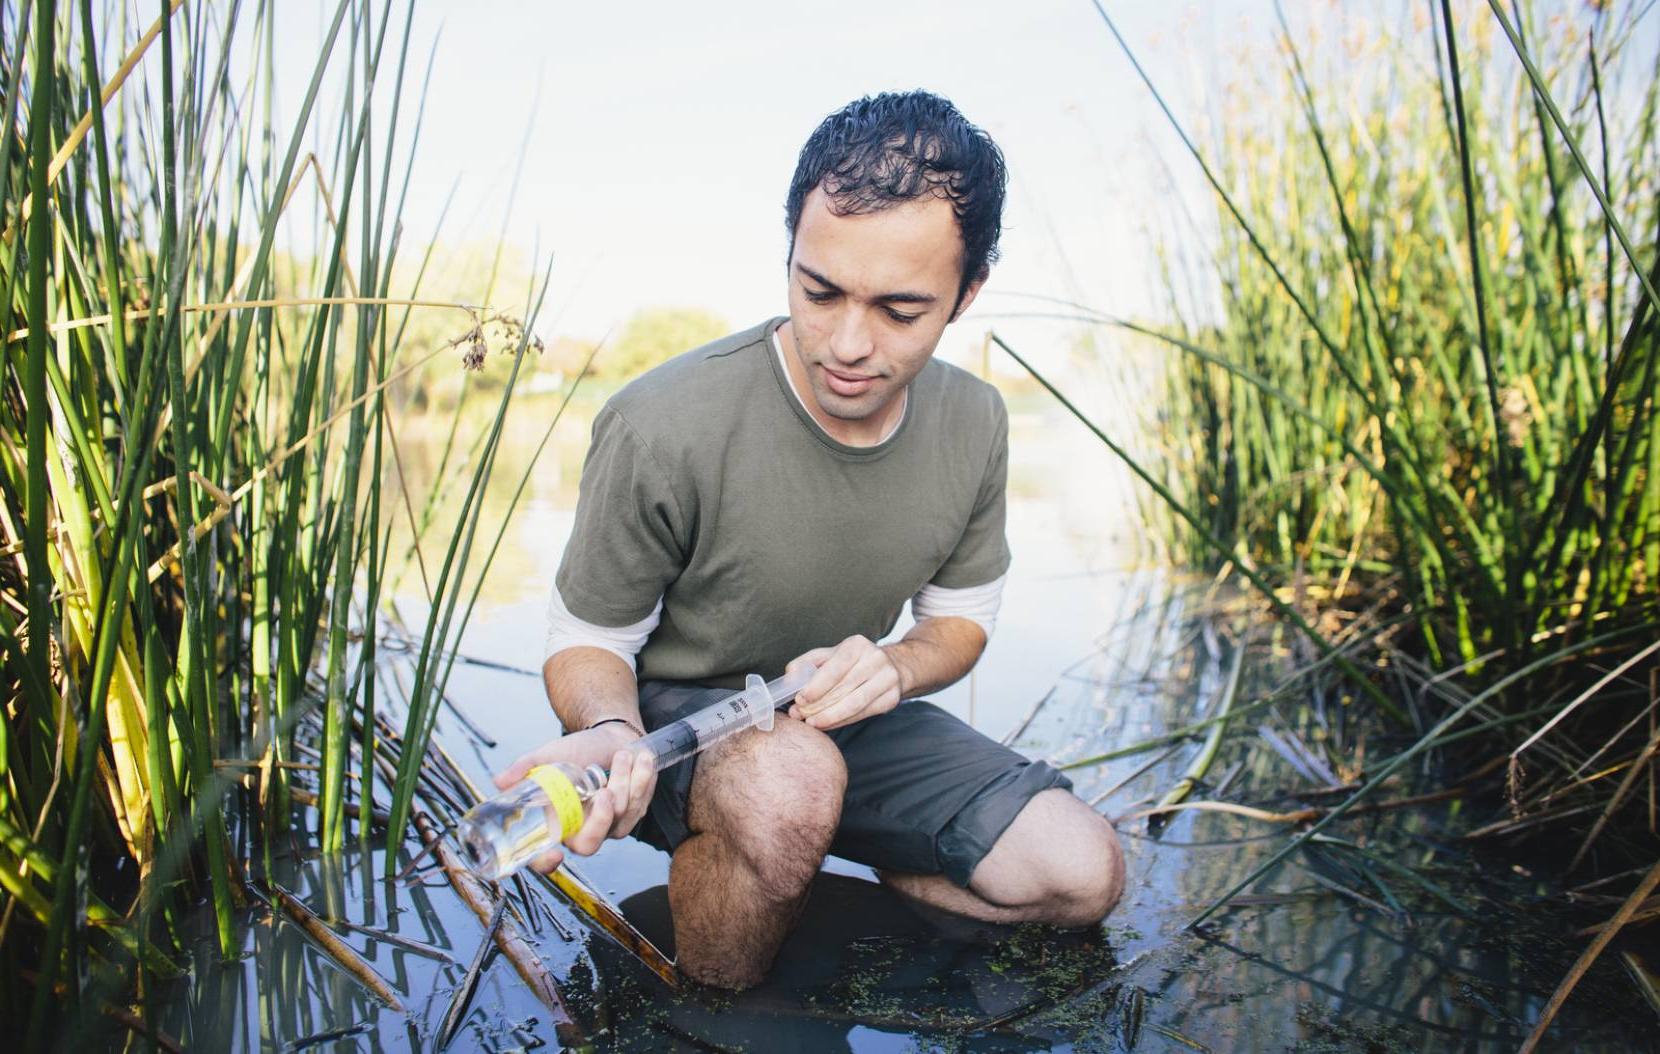 Student researcher testing water while squatting in water surrounded by tall grass.